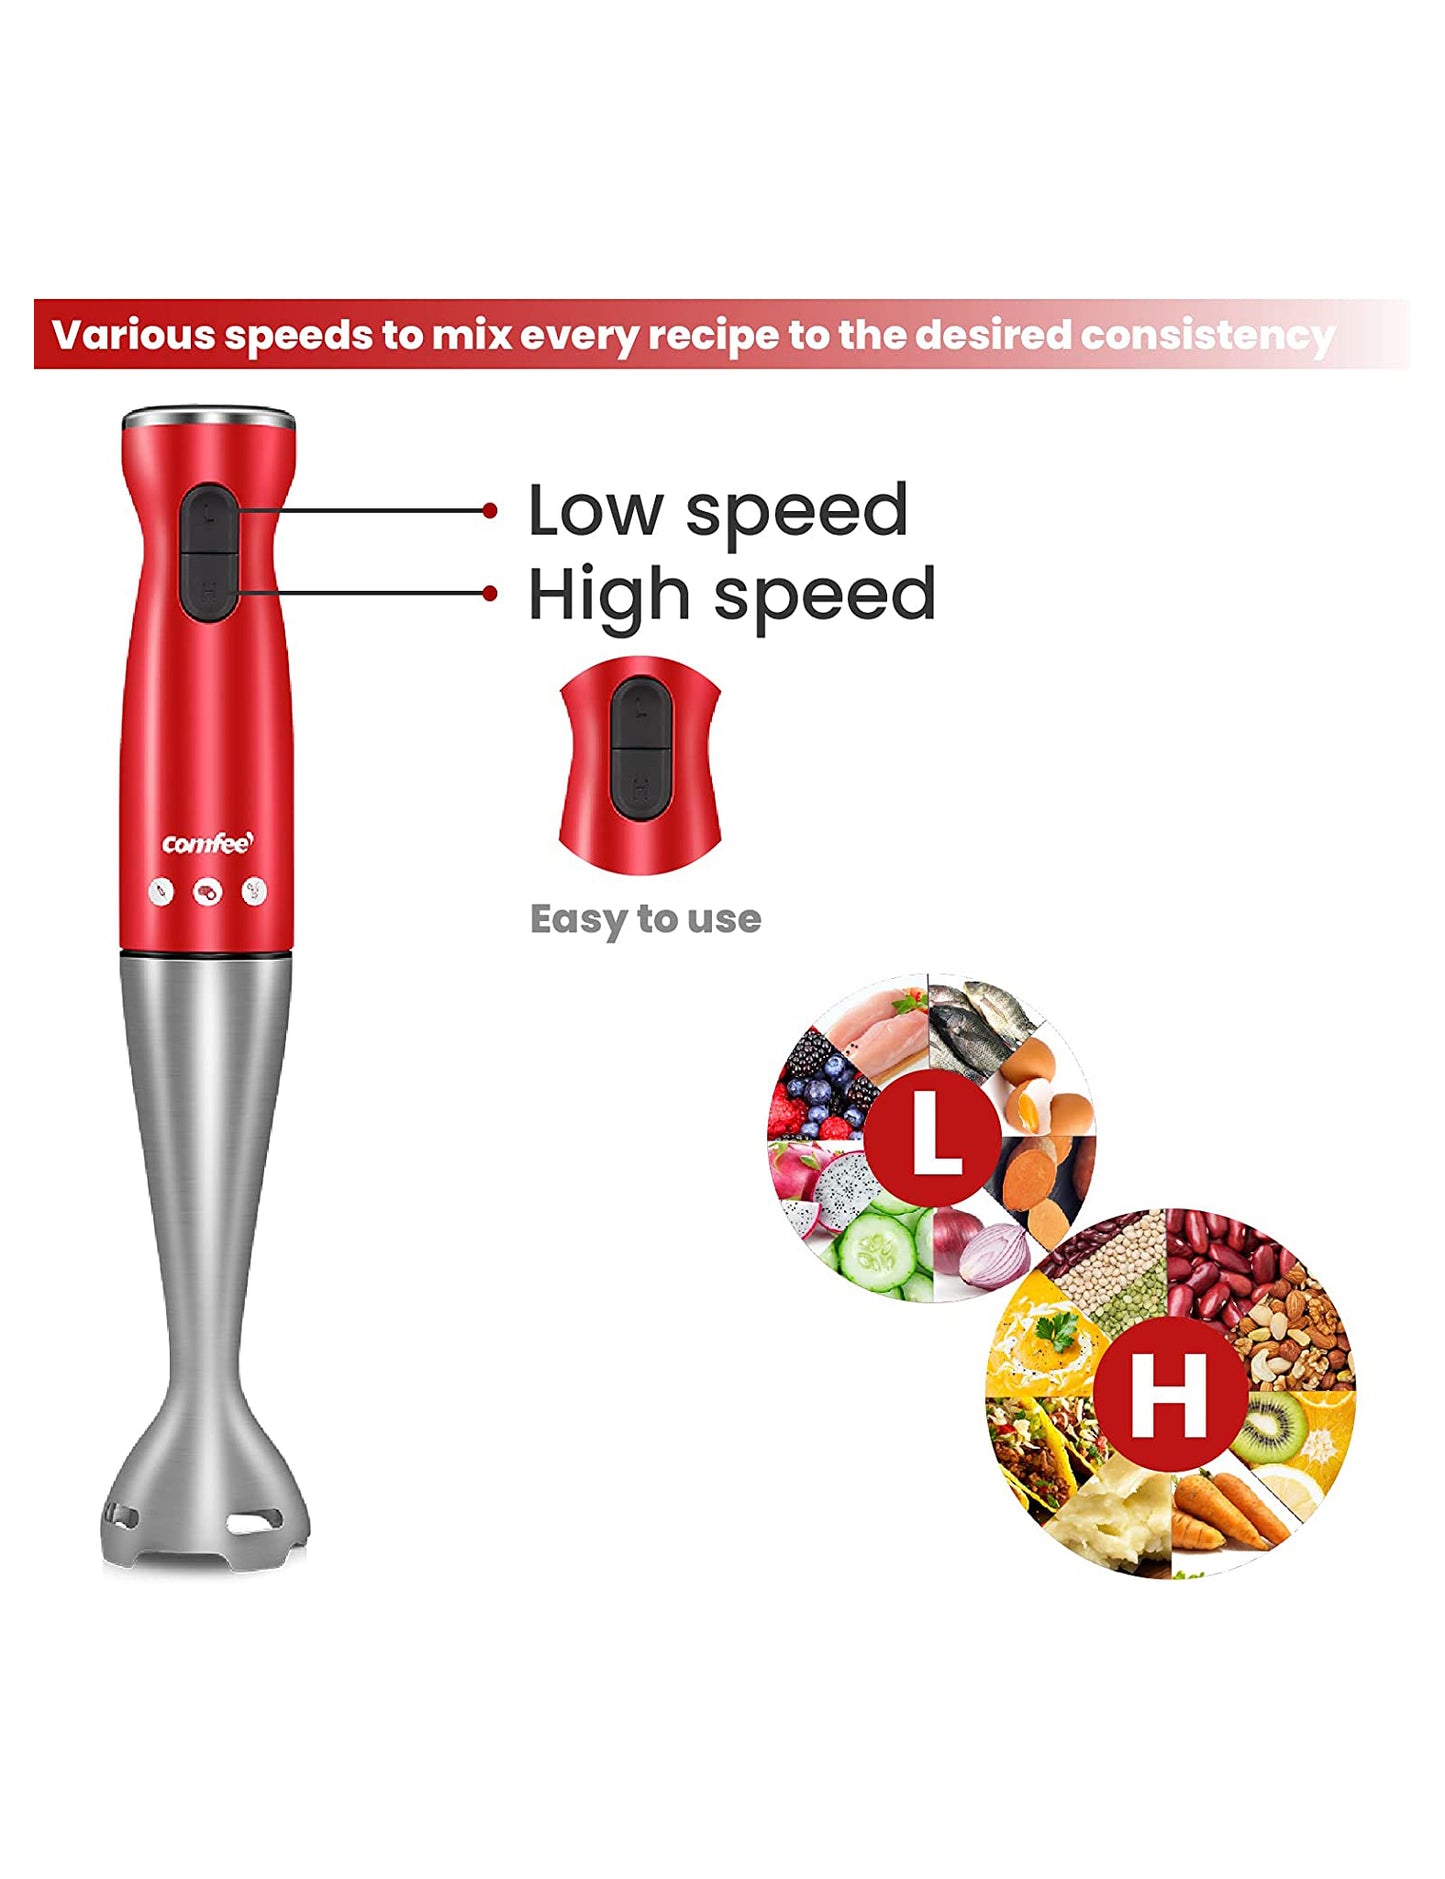 8speed levels of the comfee immersion hand blender